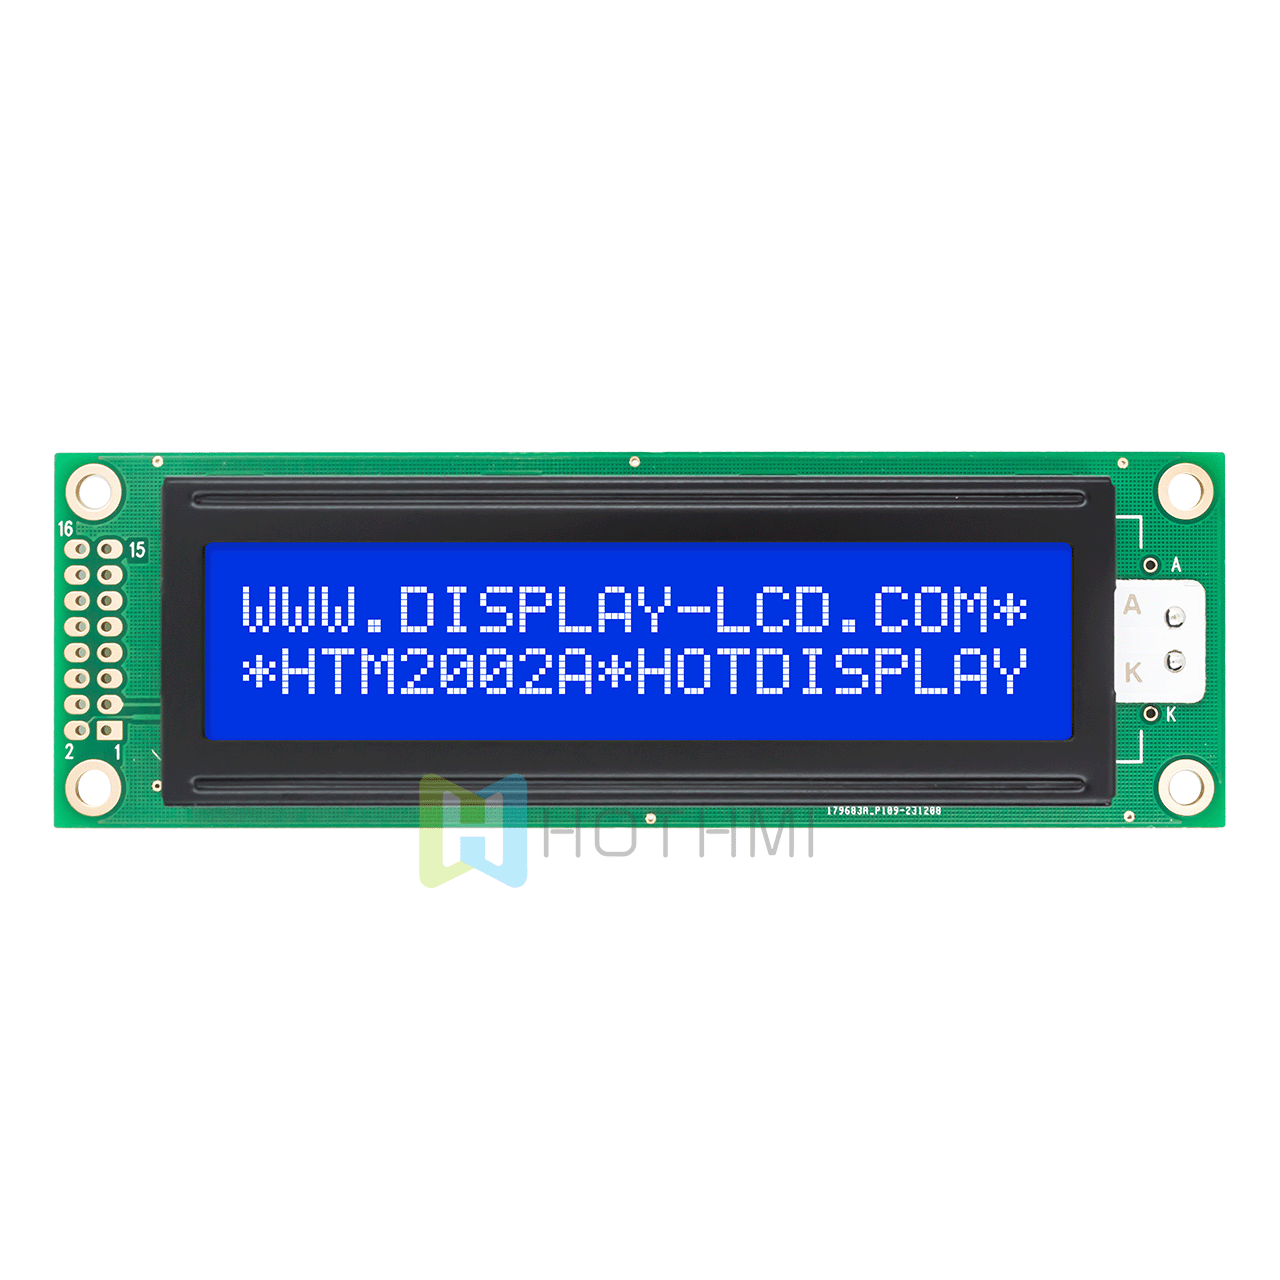 2X20 character monochrome LCD screen | STN-blue display with white backlight | 5.0V | Totally transflective display | ST7066U controller | Adruino